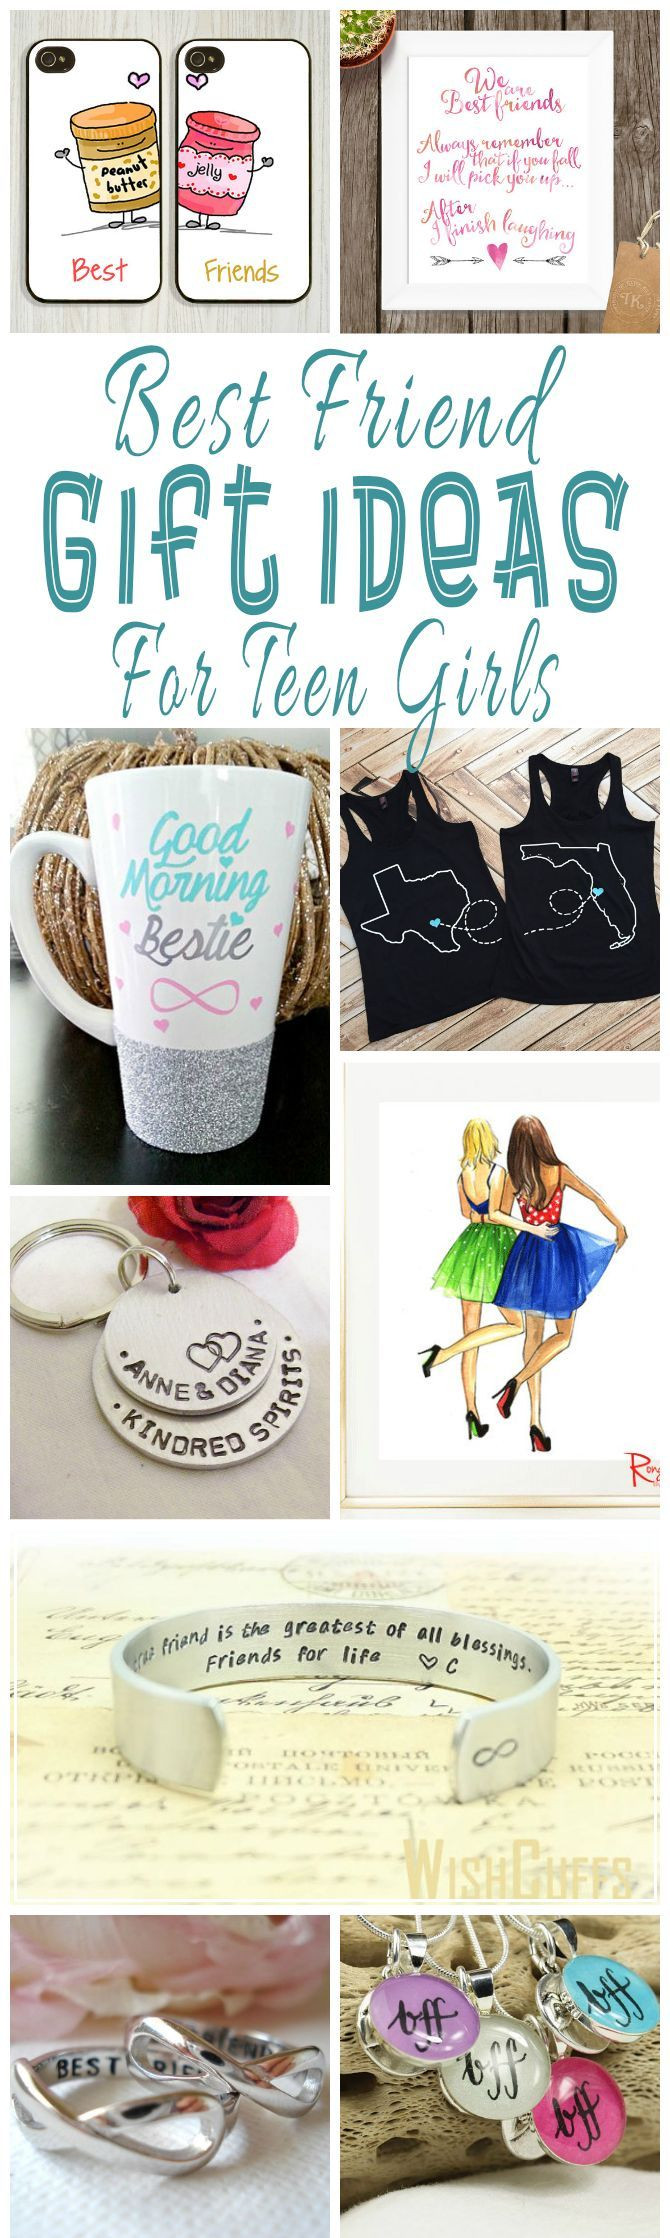 Christmas Gifts For Best Friend
 Best Friend Gift Ideas For Teens